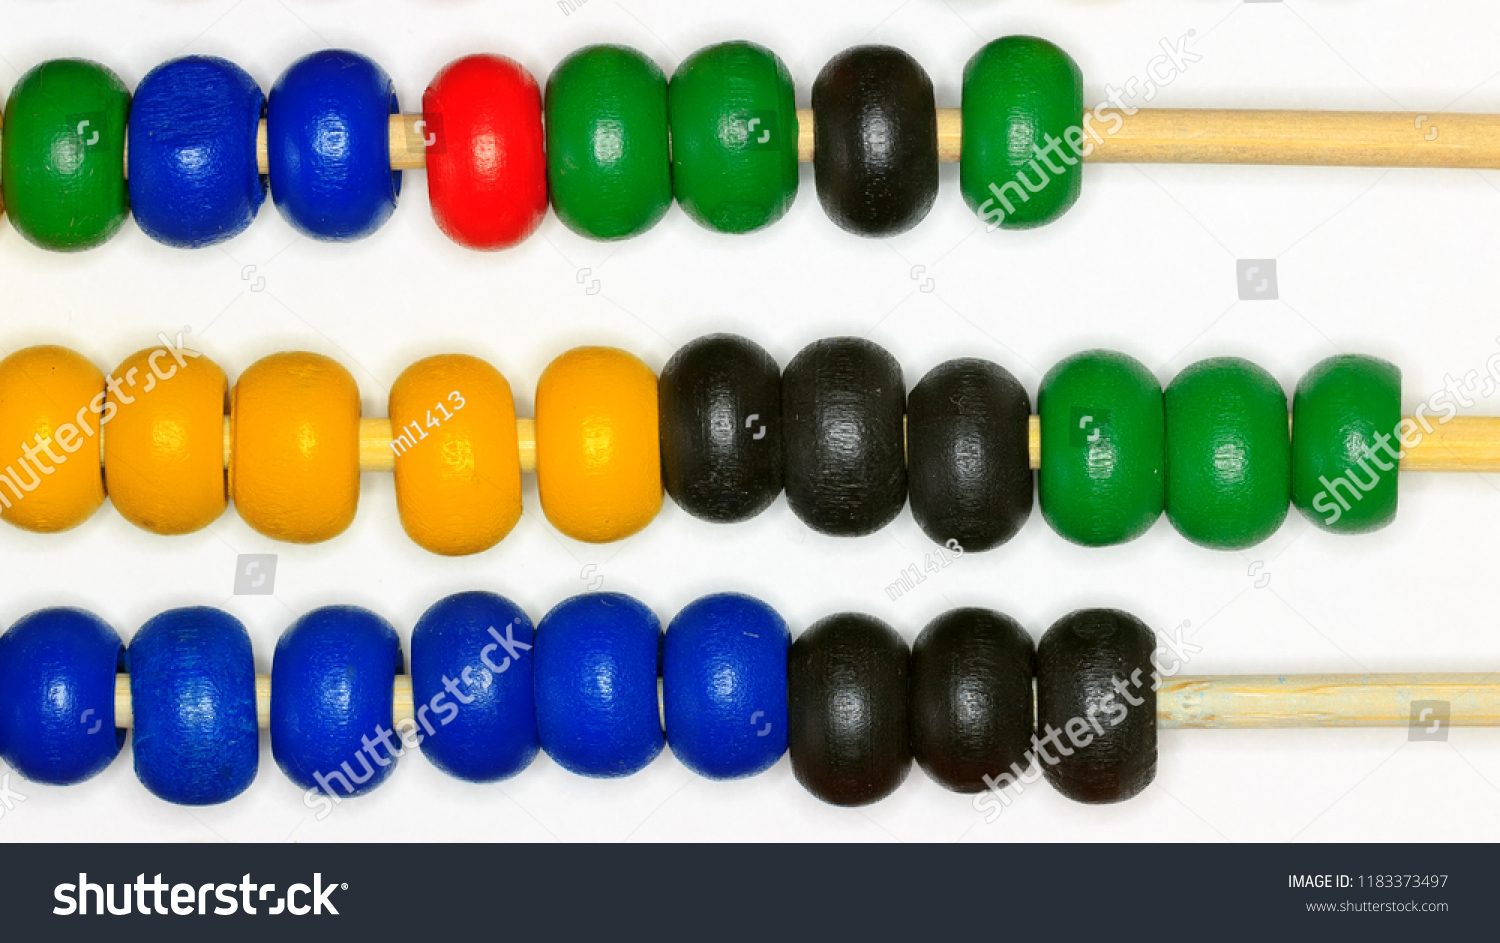 baby colored abacus toy / background image educational educational educational educational game #1183373497